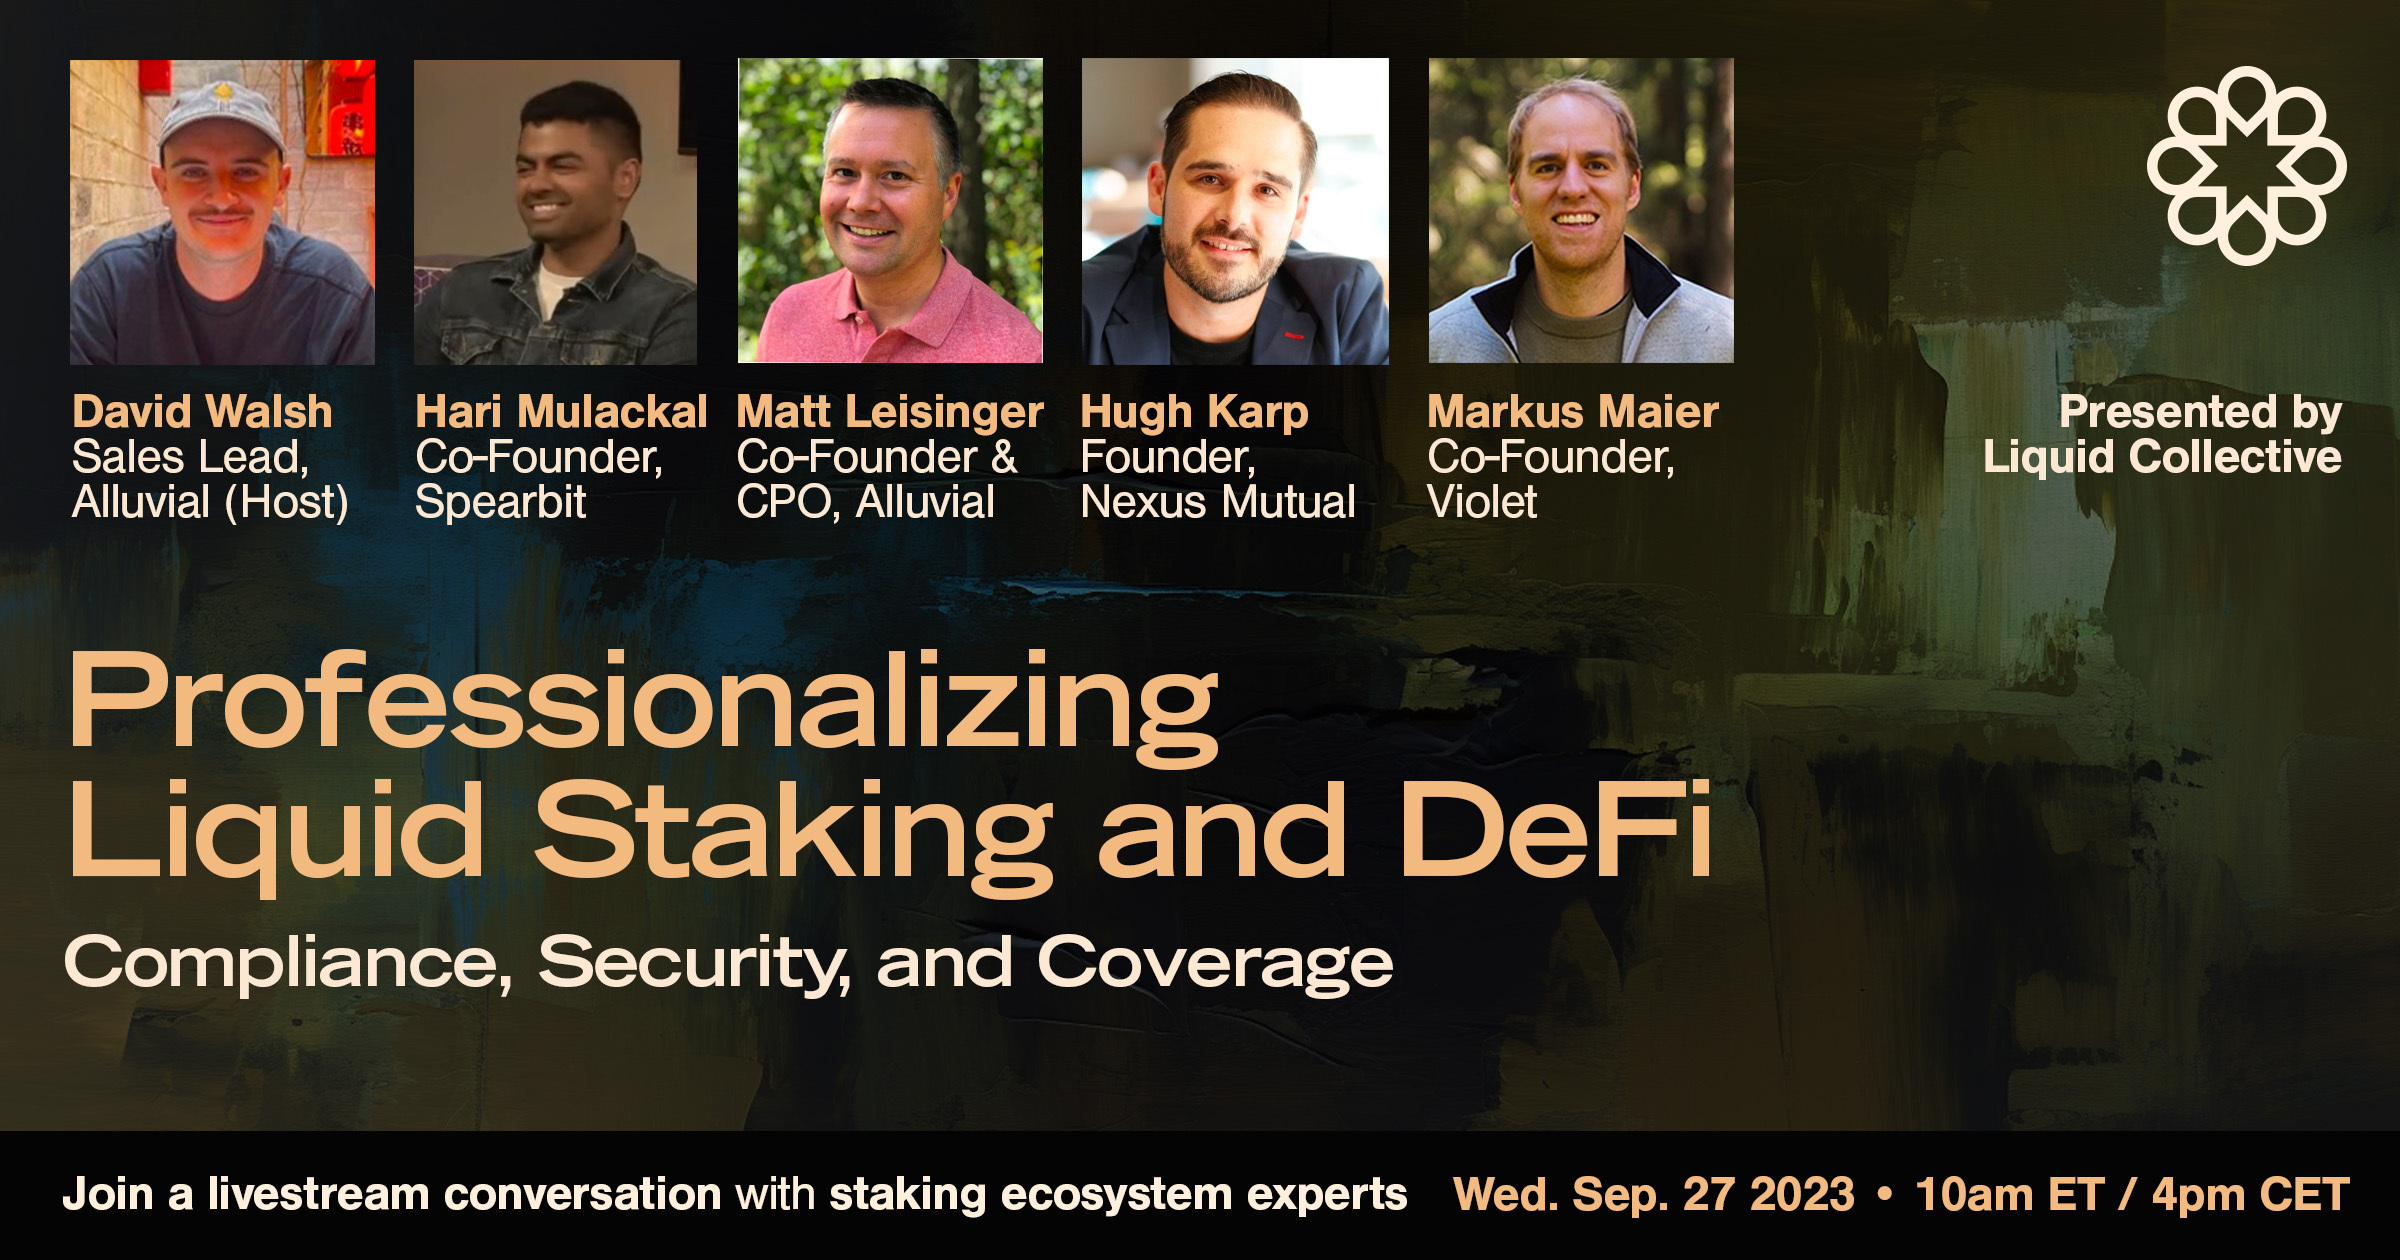 Video: “Professionalizing Liquid Staking and DeFi: Compliance, Security, and Coverage”